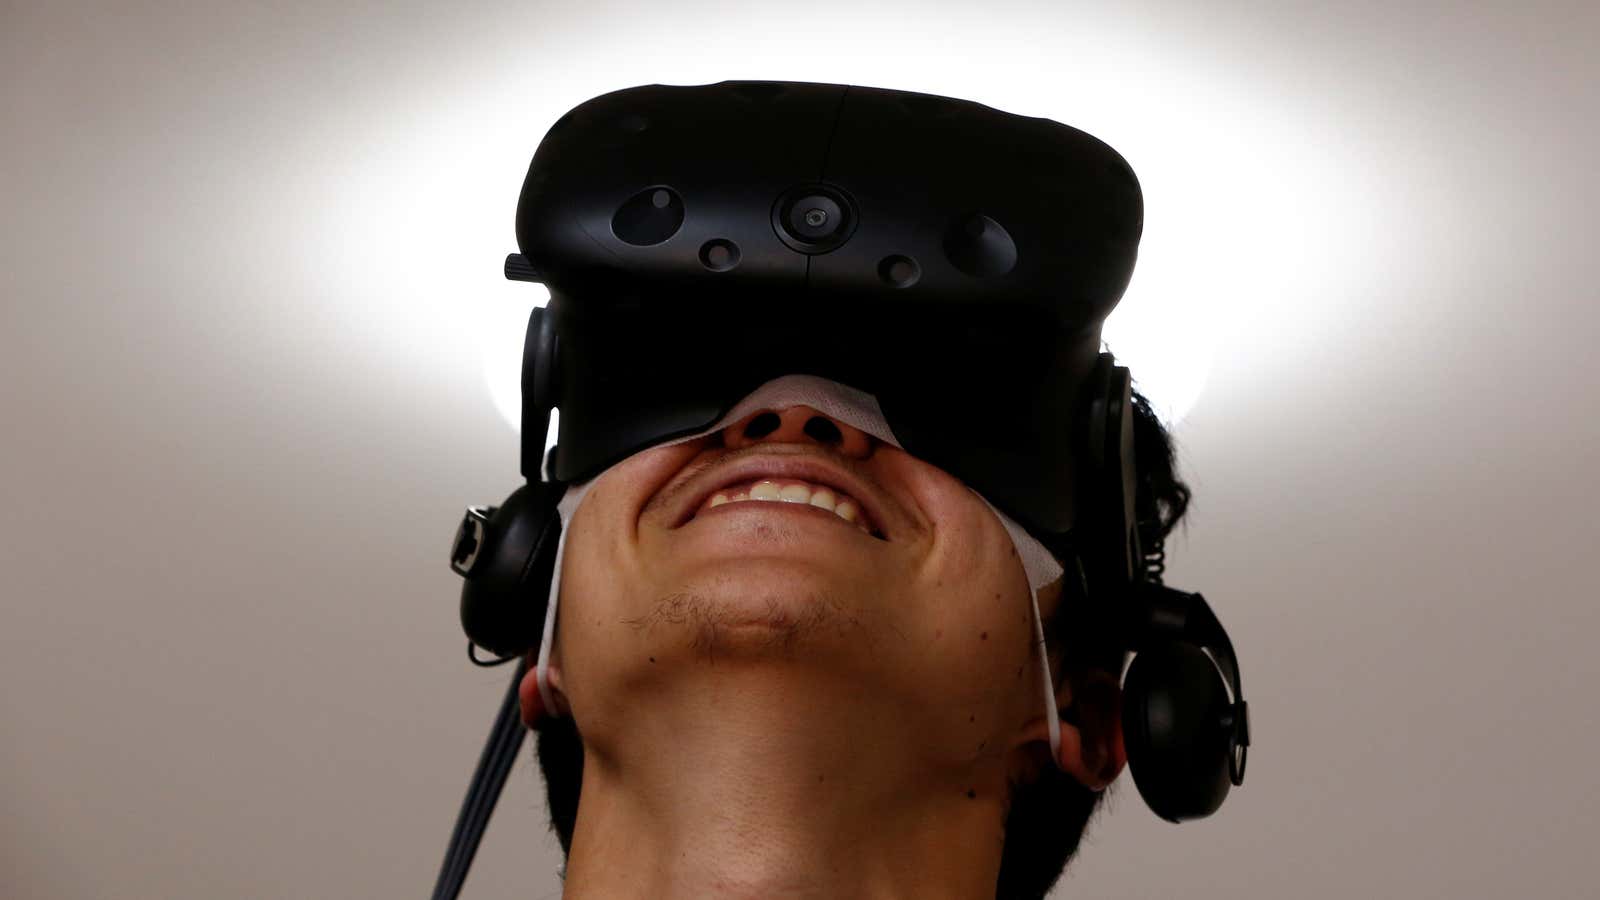 A man uses a VR headset.